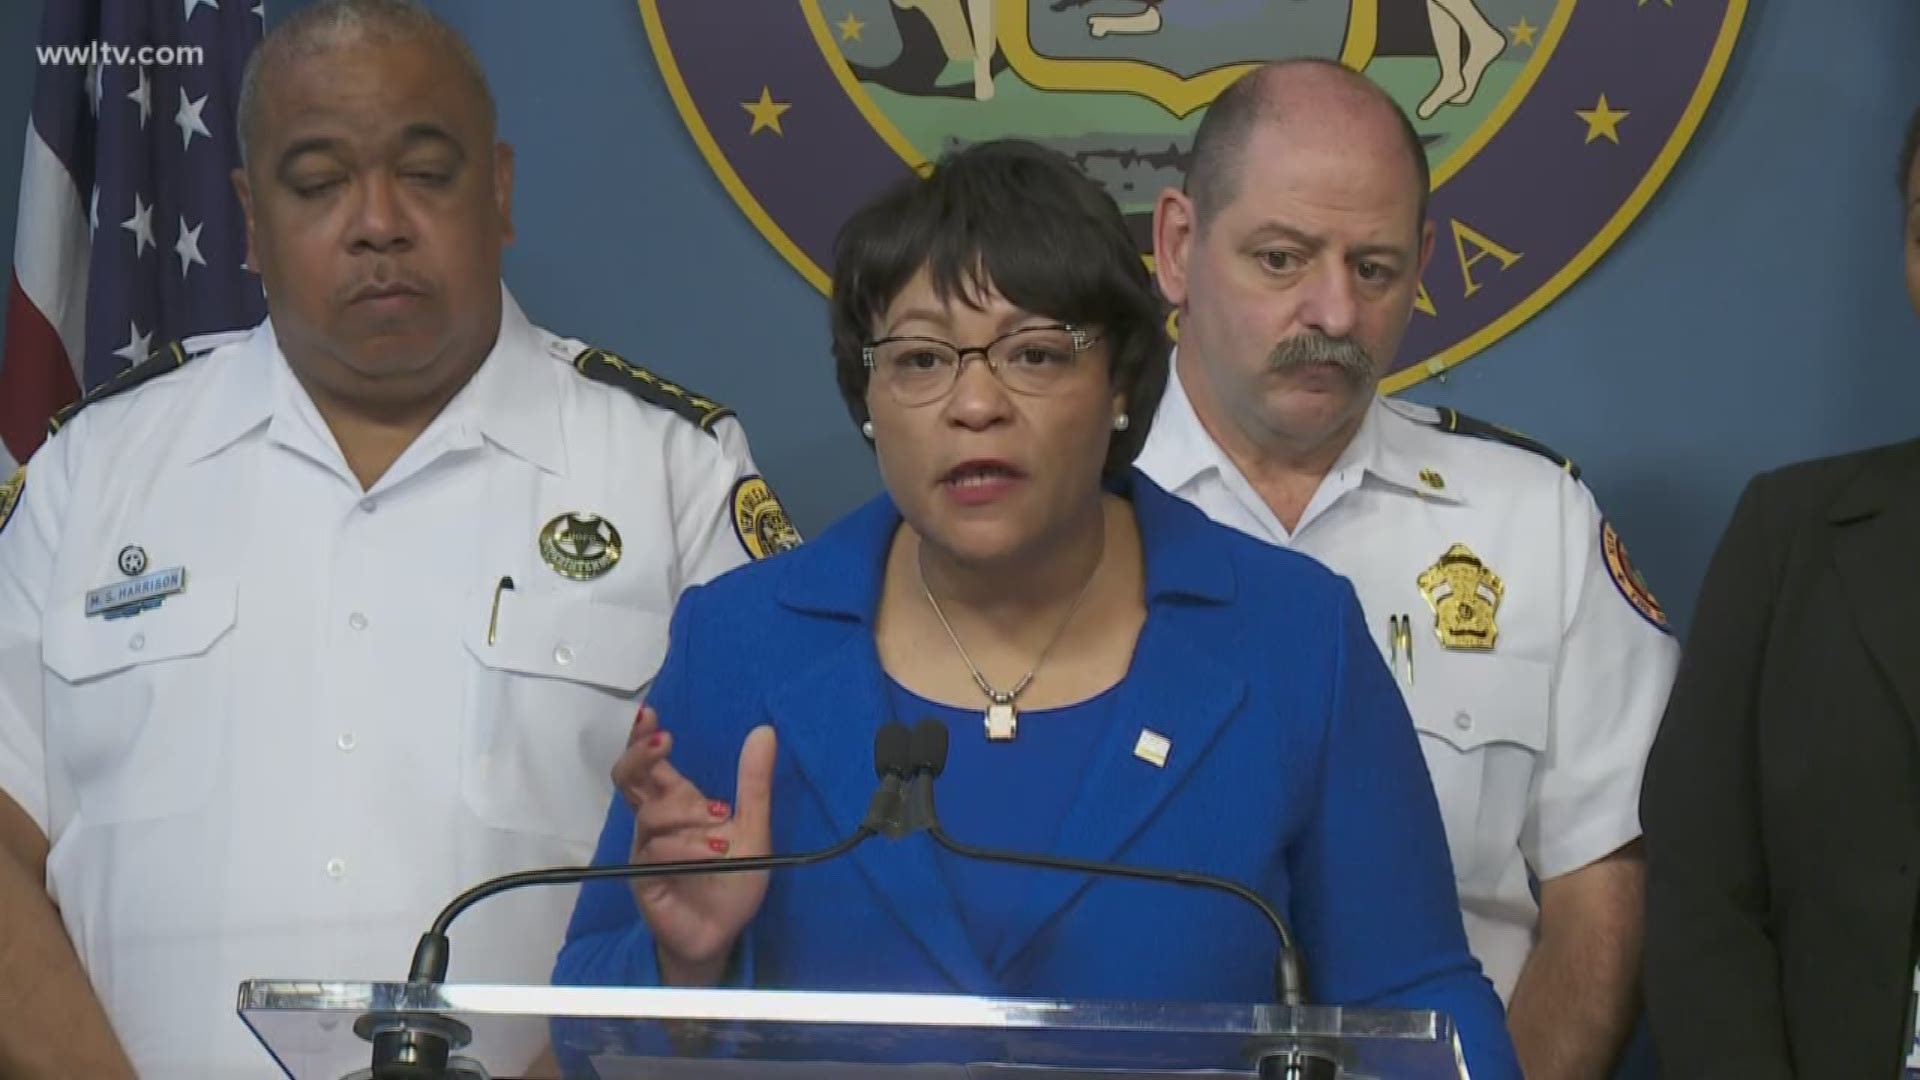 How she handles that crisis - and crime - will likely define Mayor LaToya Cantrell.